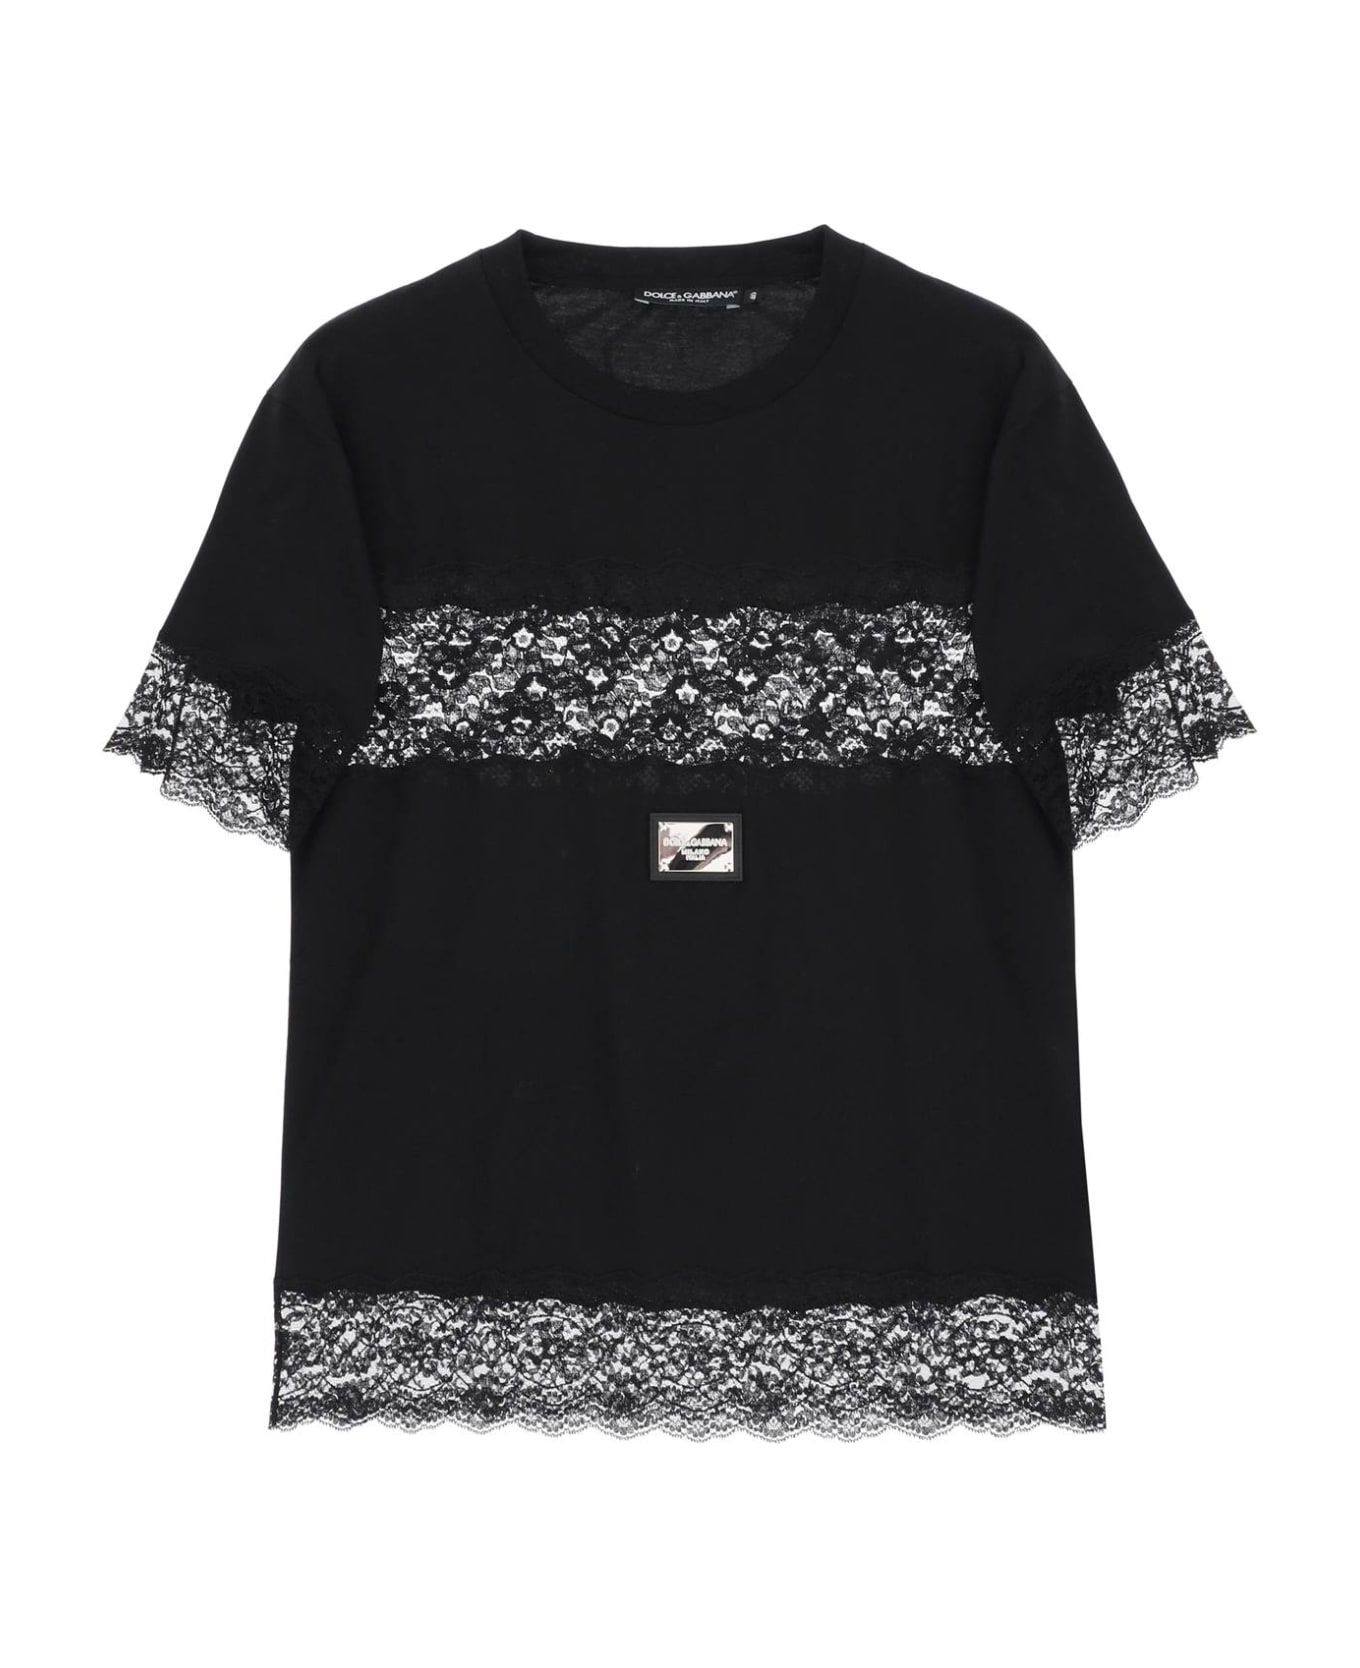 Dolce & Gabbana T-shirt With Lace Inserts - NERO (Black) Tシャツ